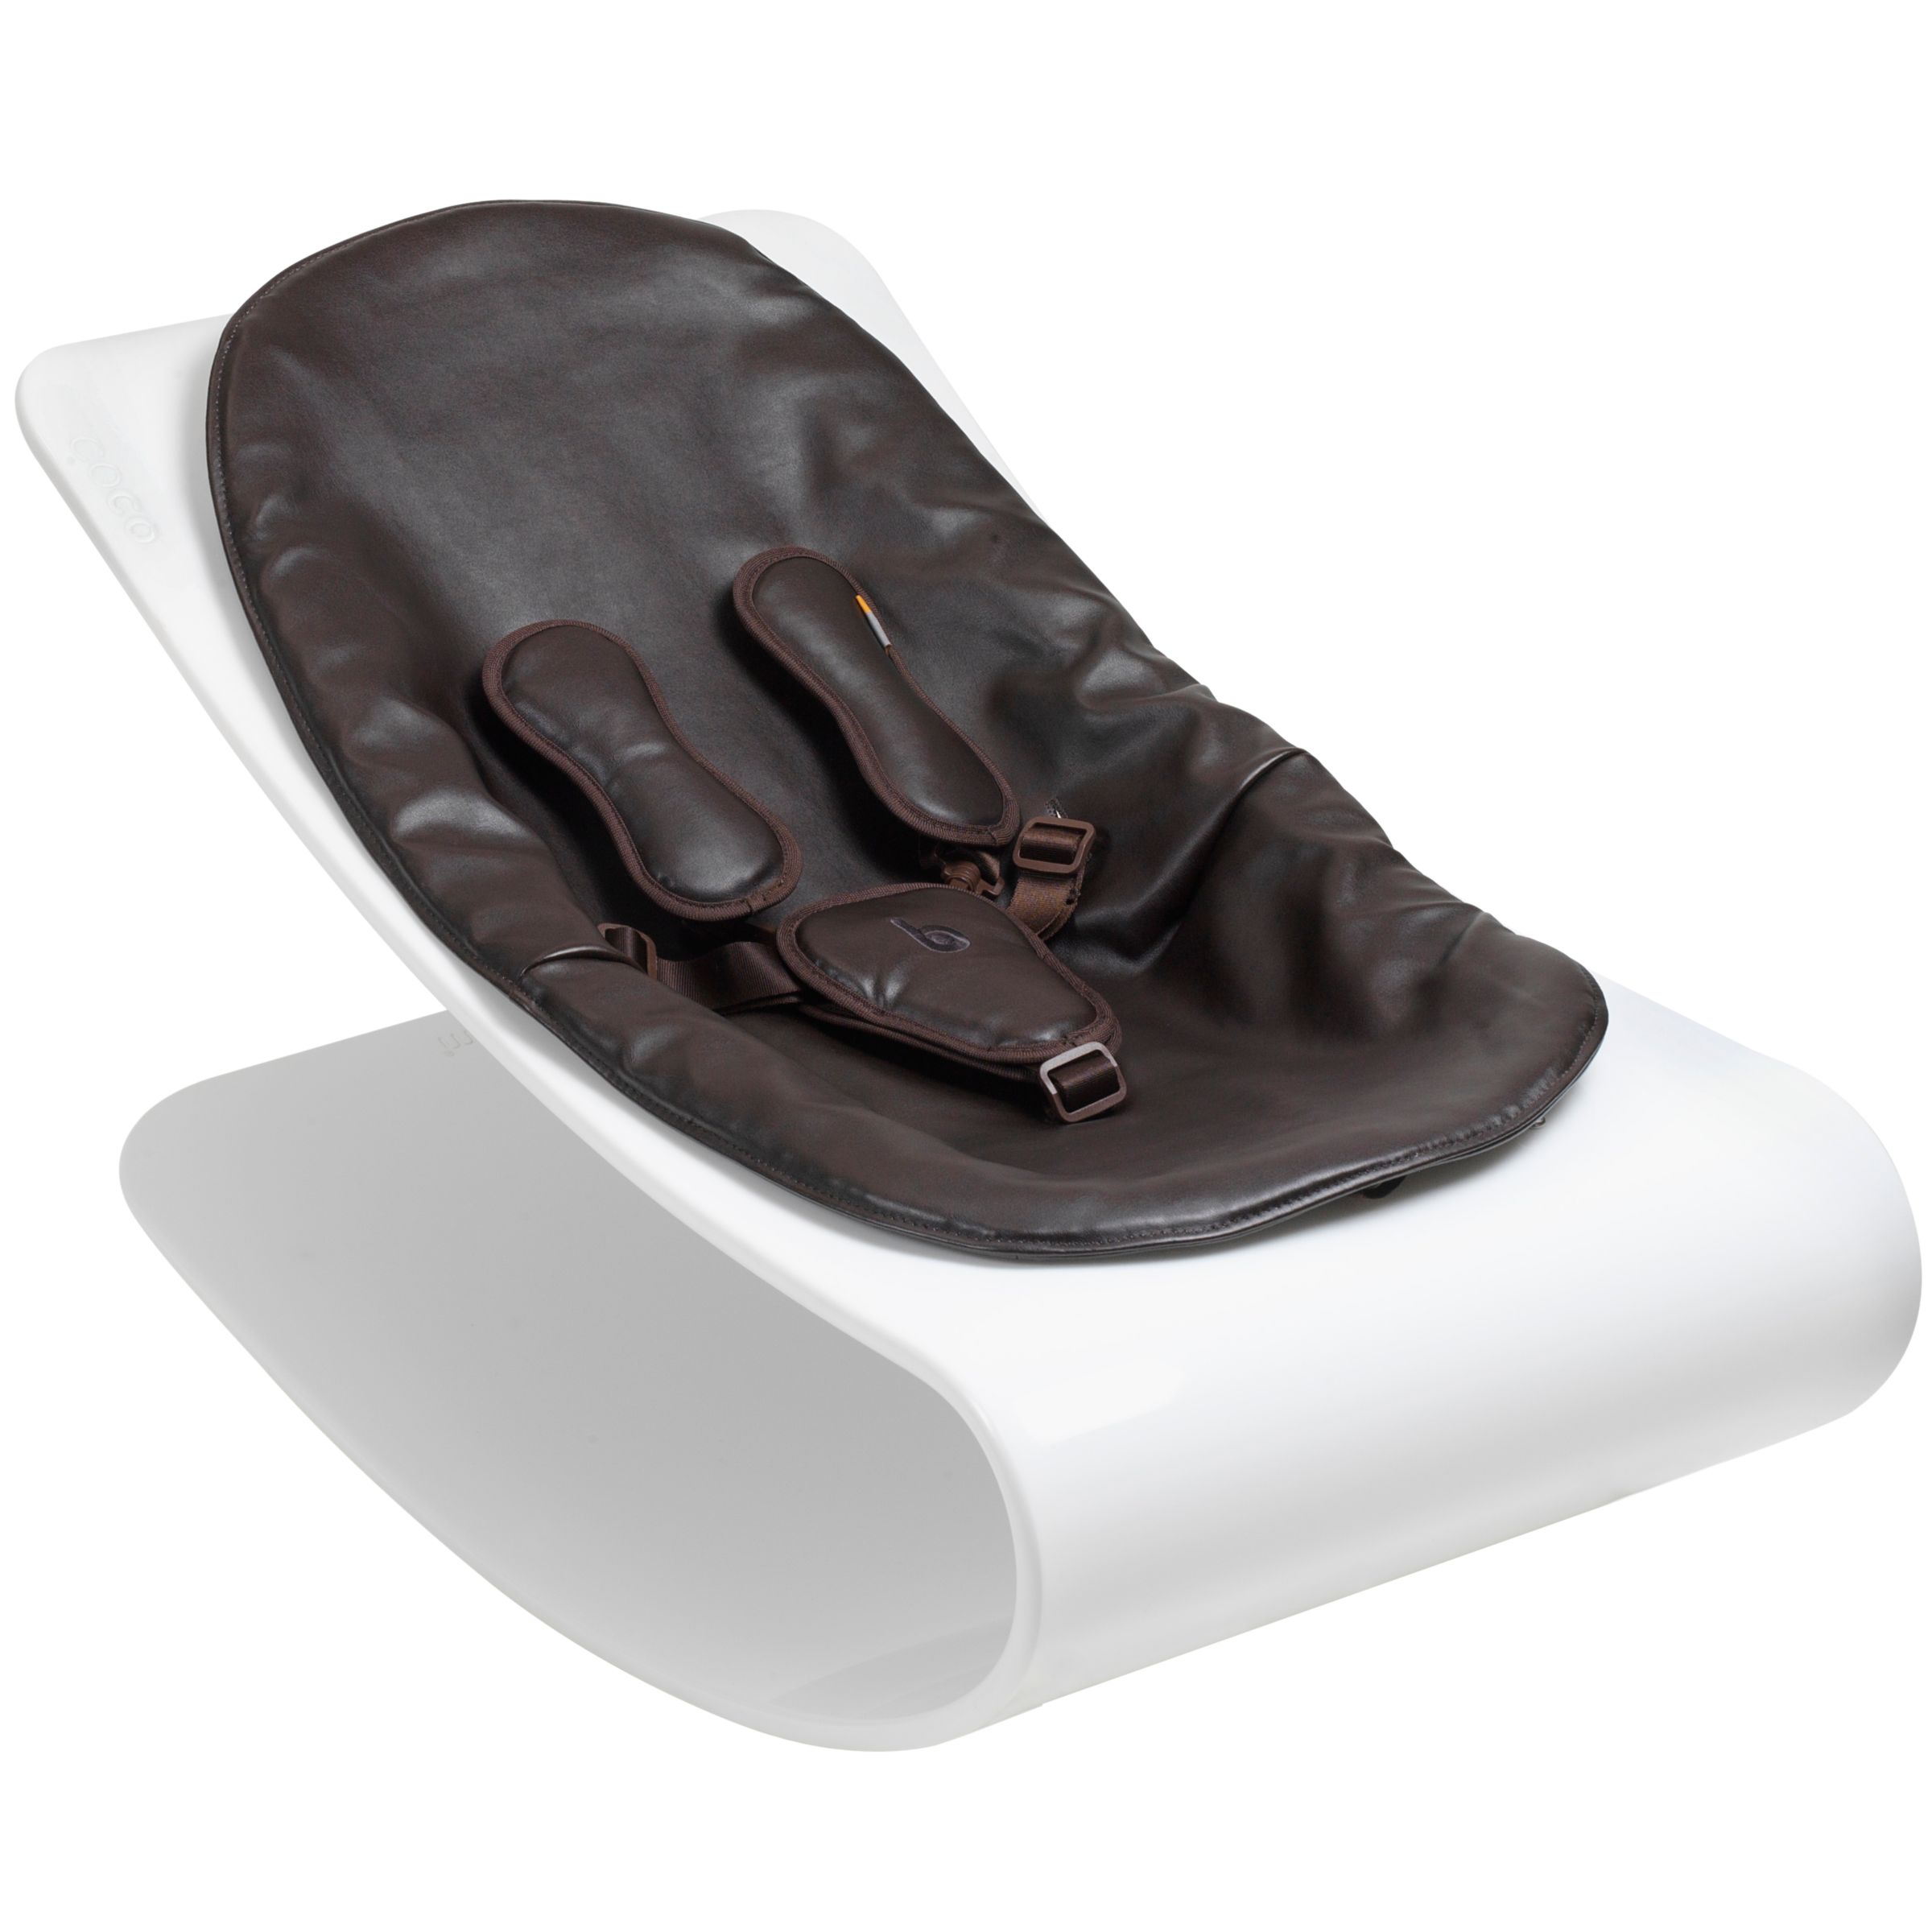 bloom Coco Plexistyle Baby Lounger, Ivory White with Henna Brown at John Lewis